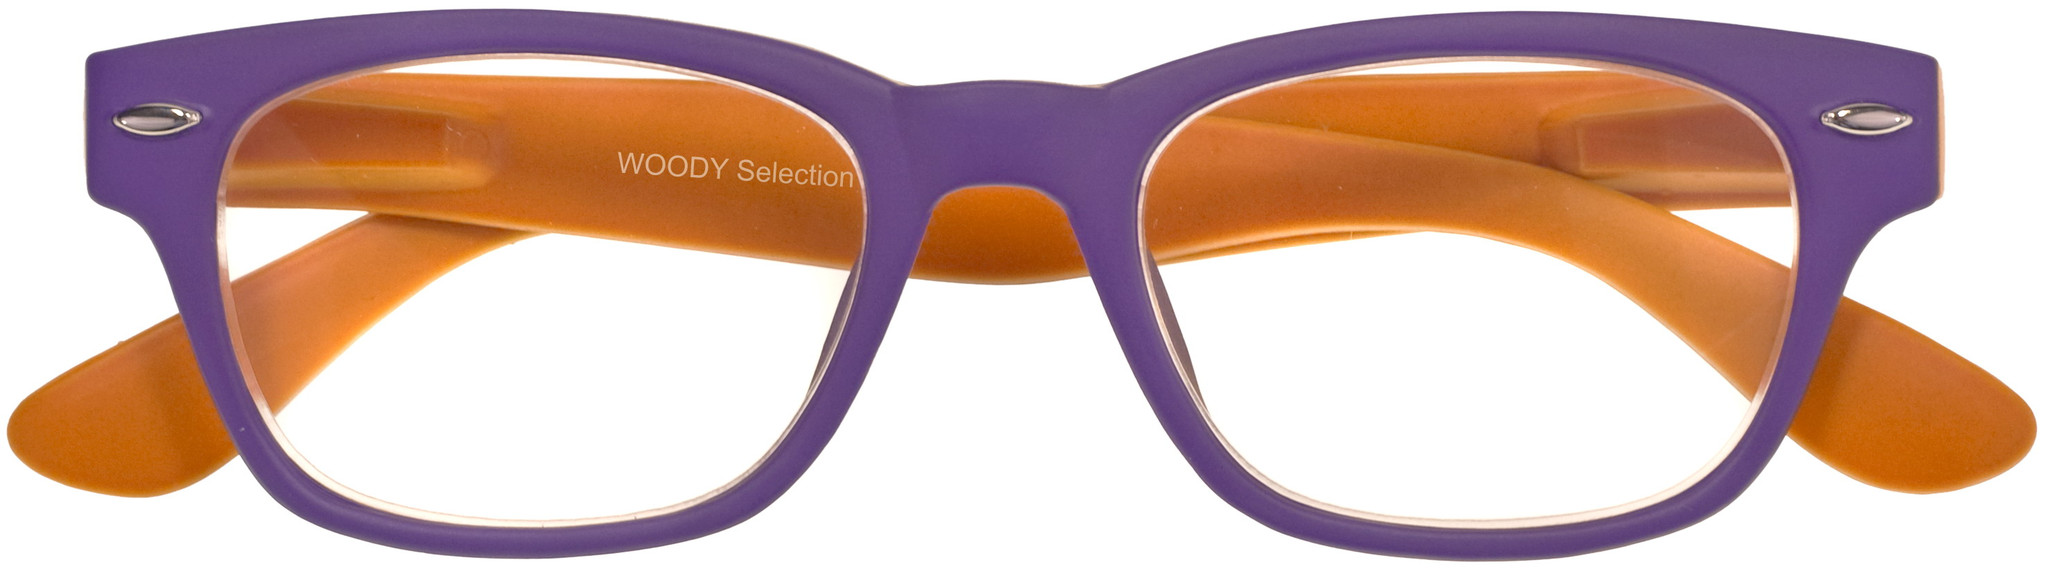 Woody Selection Purple-orange Readers by I Need You Readers